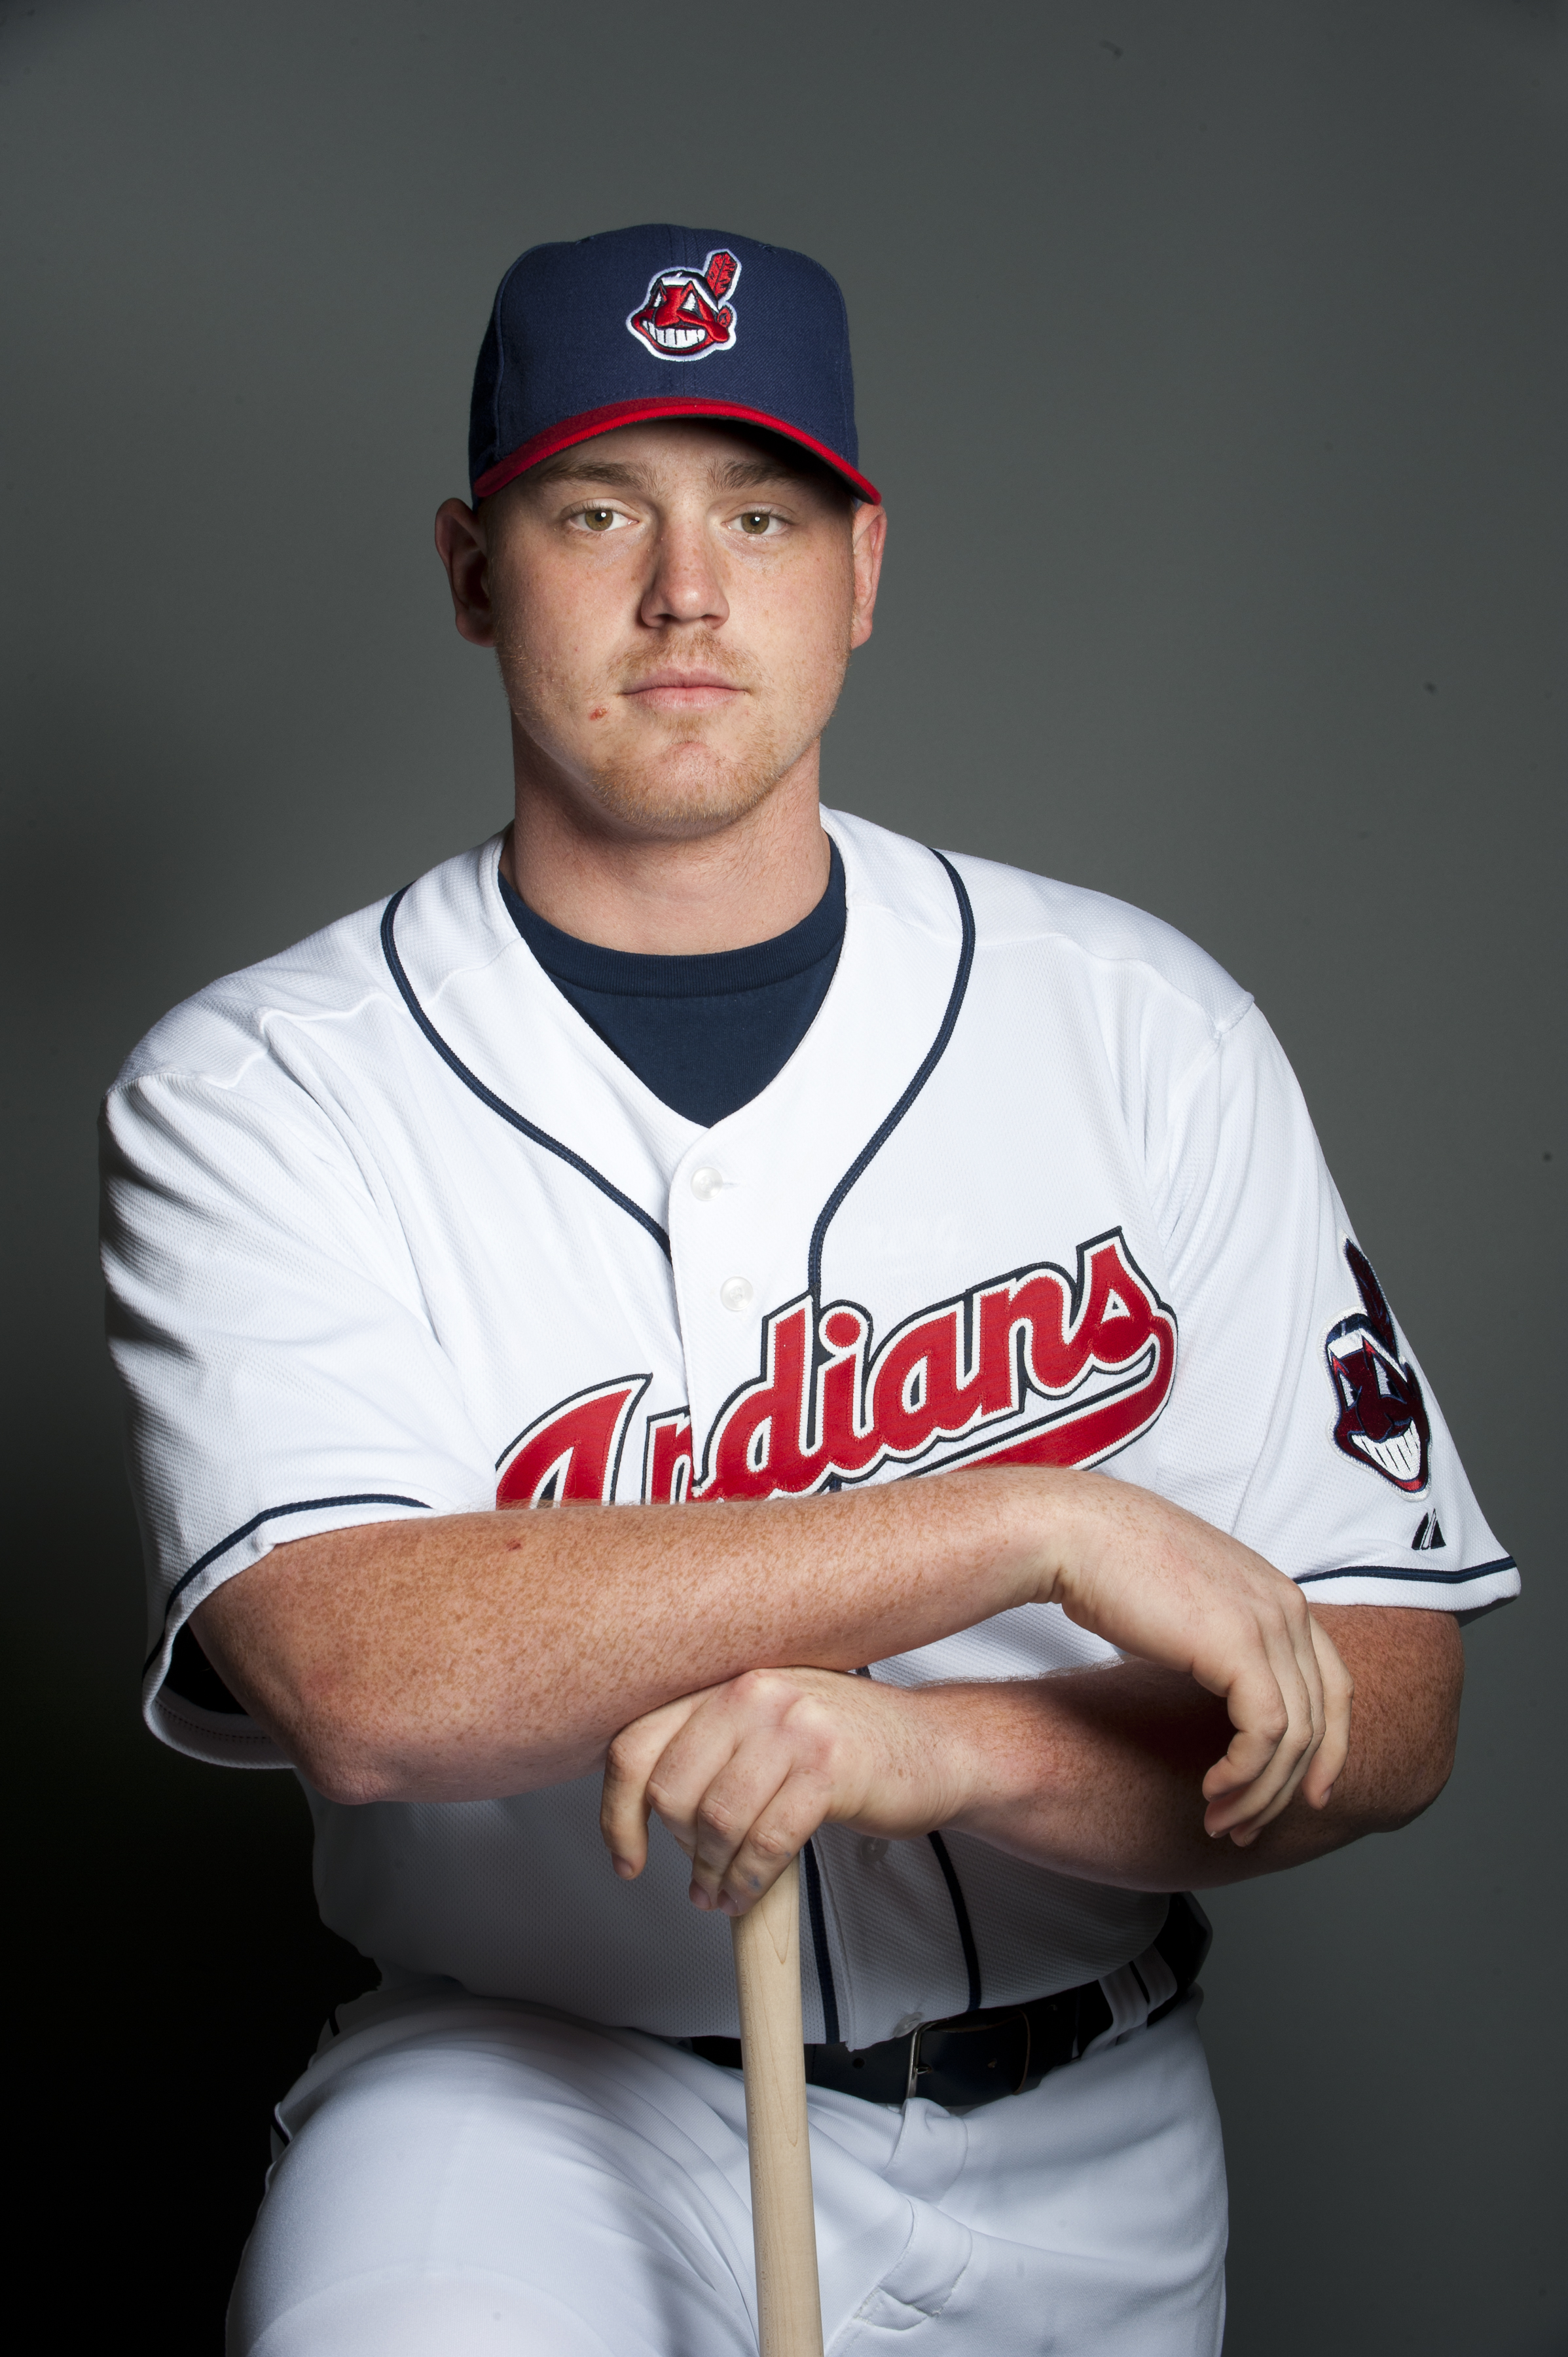 GOODYEAR, AZ - FEBRUARY 22: Nick Weglarz #71 of the Cleveland Indians poses during their photo day at the Cleveland Indians Spring Training Complex on February 22, 2011 in Goodyear, Arizona. (Photo by Rob Tringali/Getty Images)